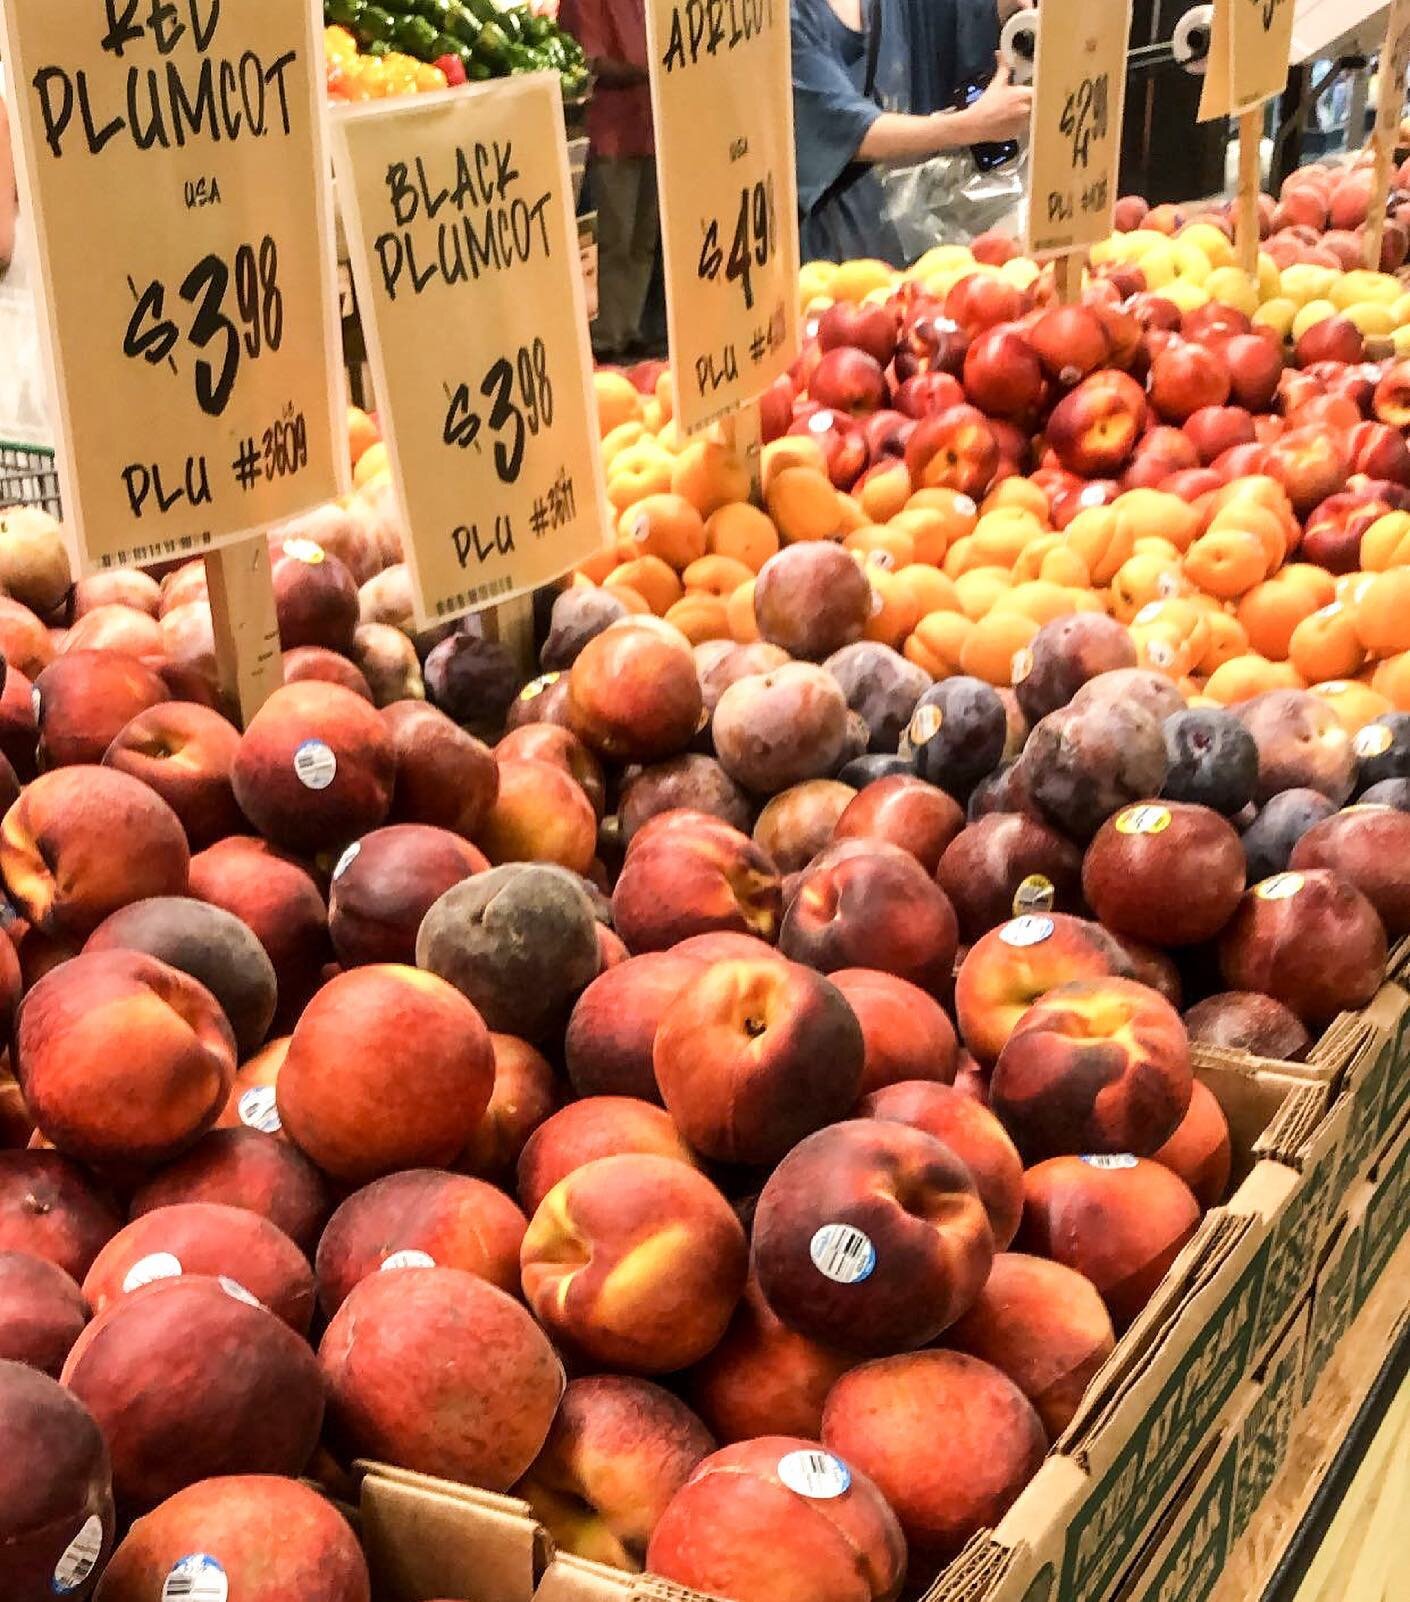 I&rsquo;m so excited for summer produce! Delicious plouts, sweet peaches, and ripe tomatoes are just the beginning. Texas has some of the most amazing, locally grown produce. Can&rsquo;t wait to use the best of what summer has to offer trying new rec